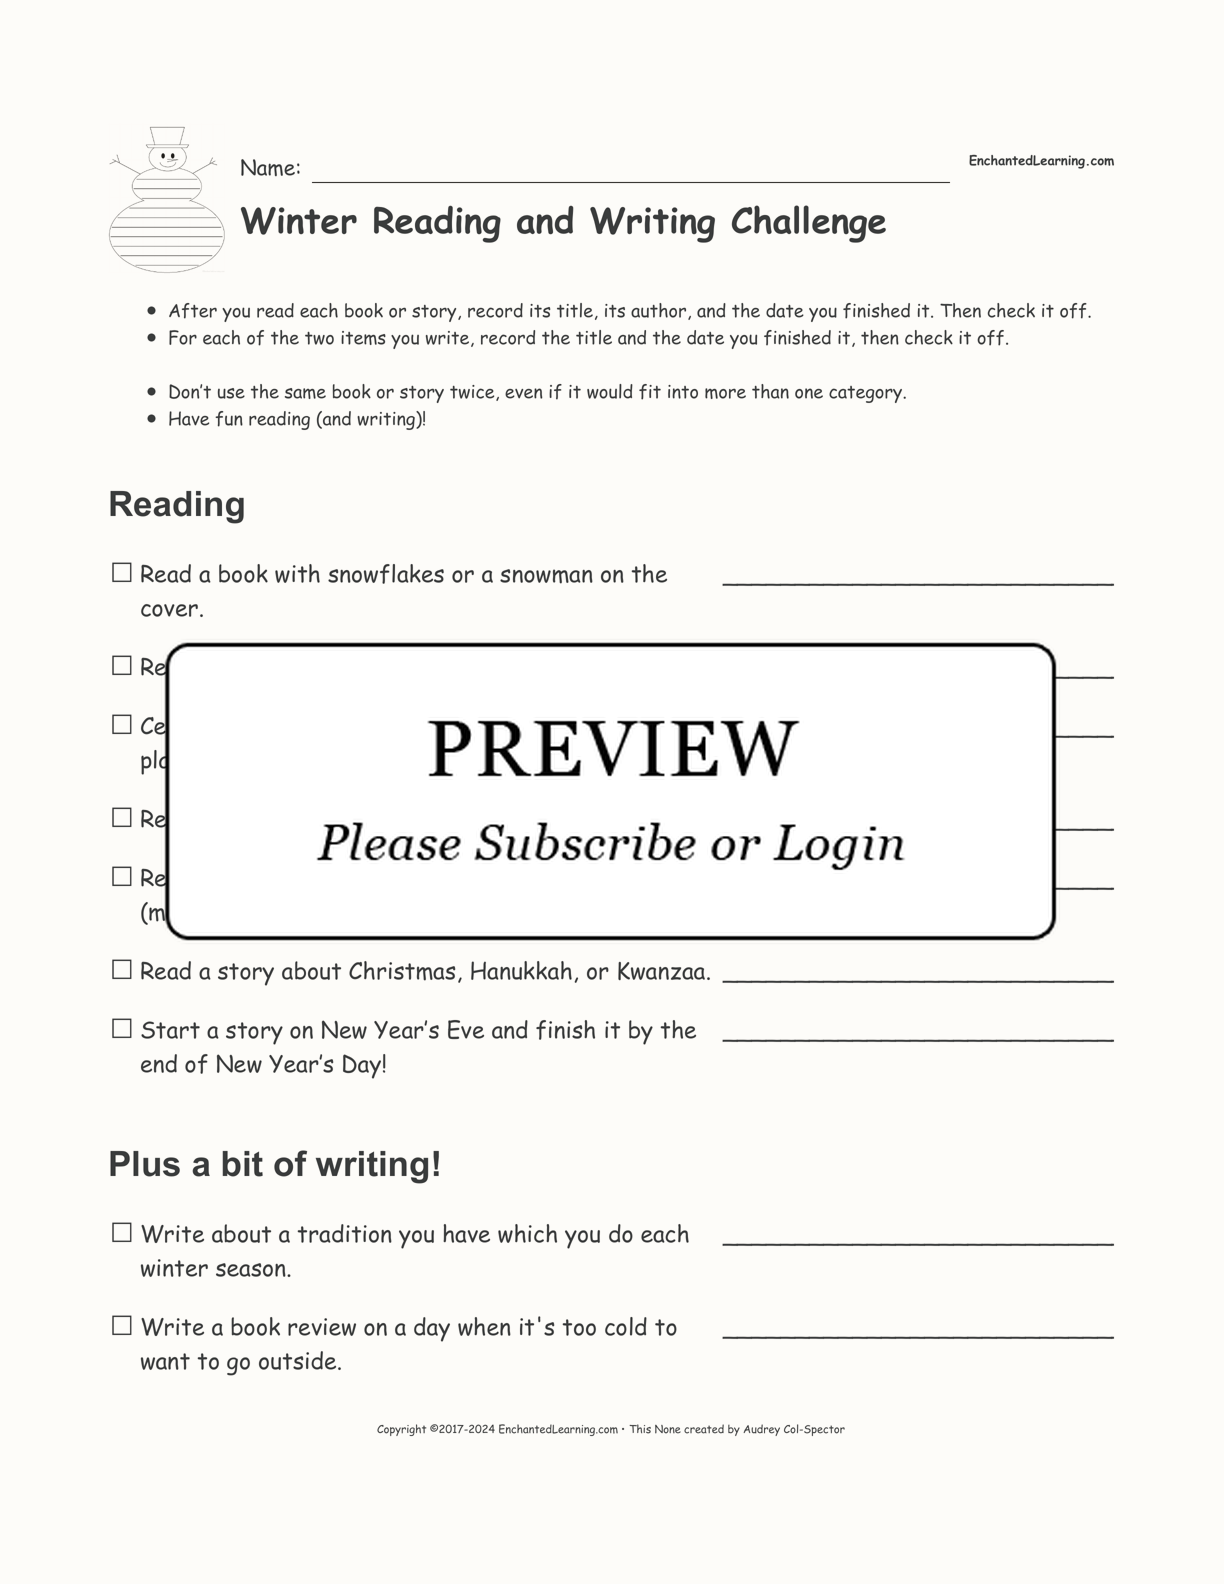 Winter Reading and Writing Challenge interactive printout page 1